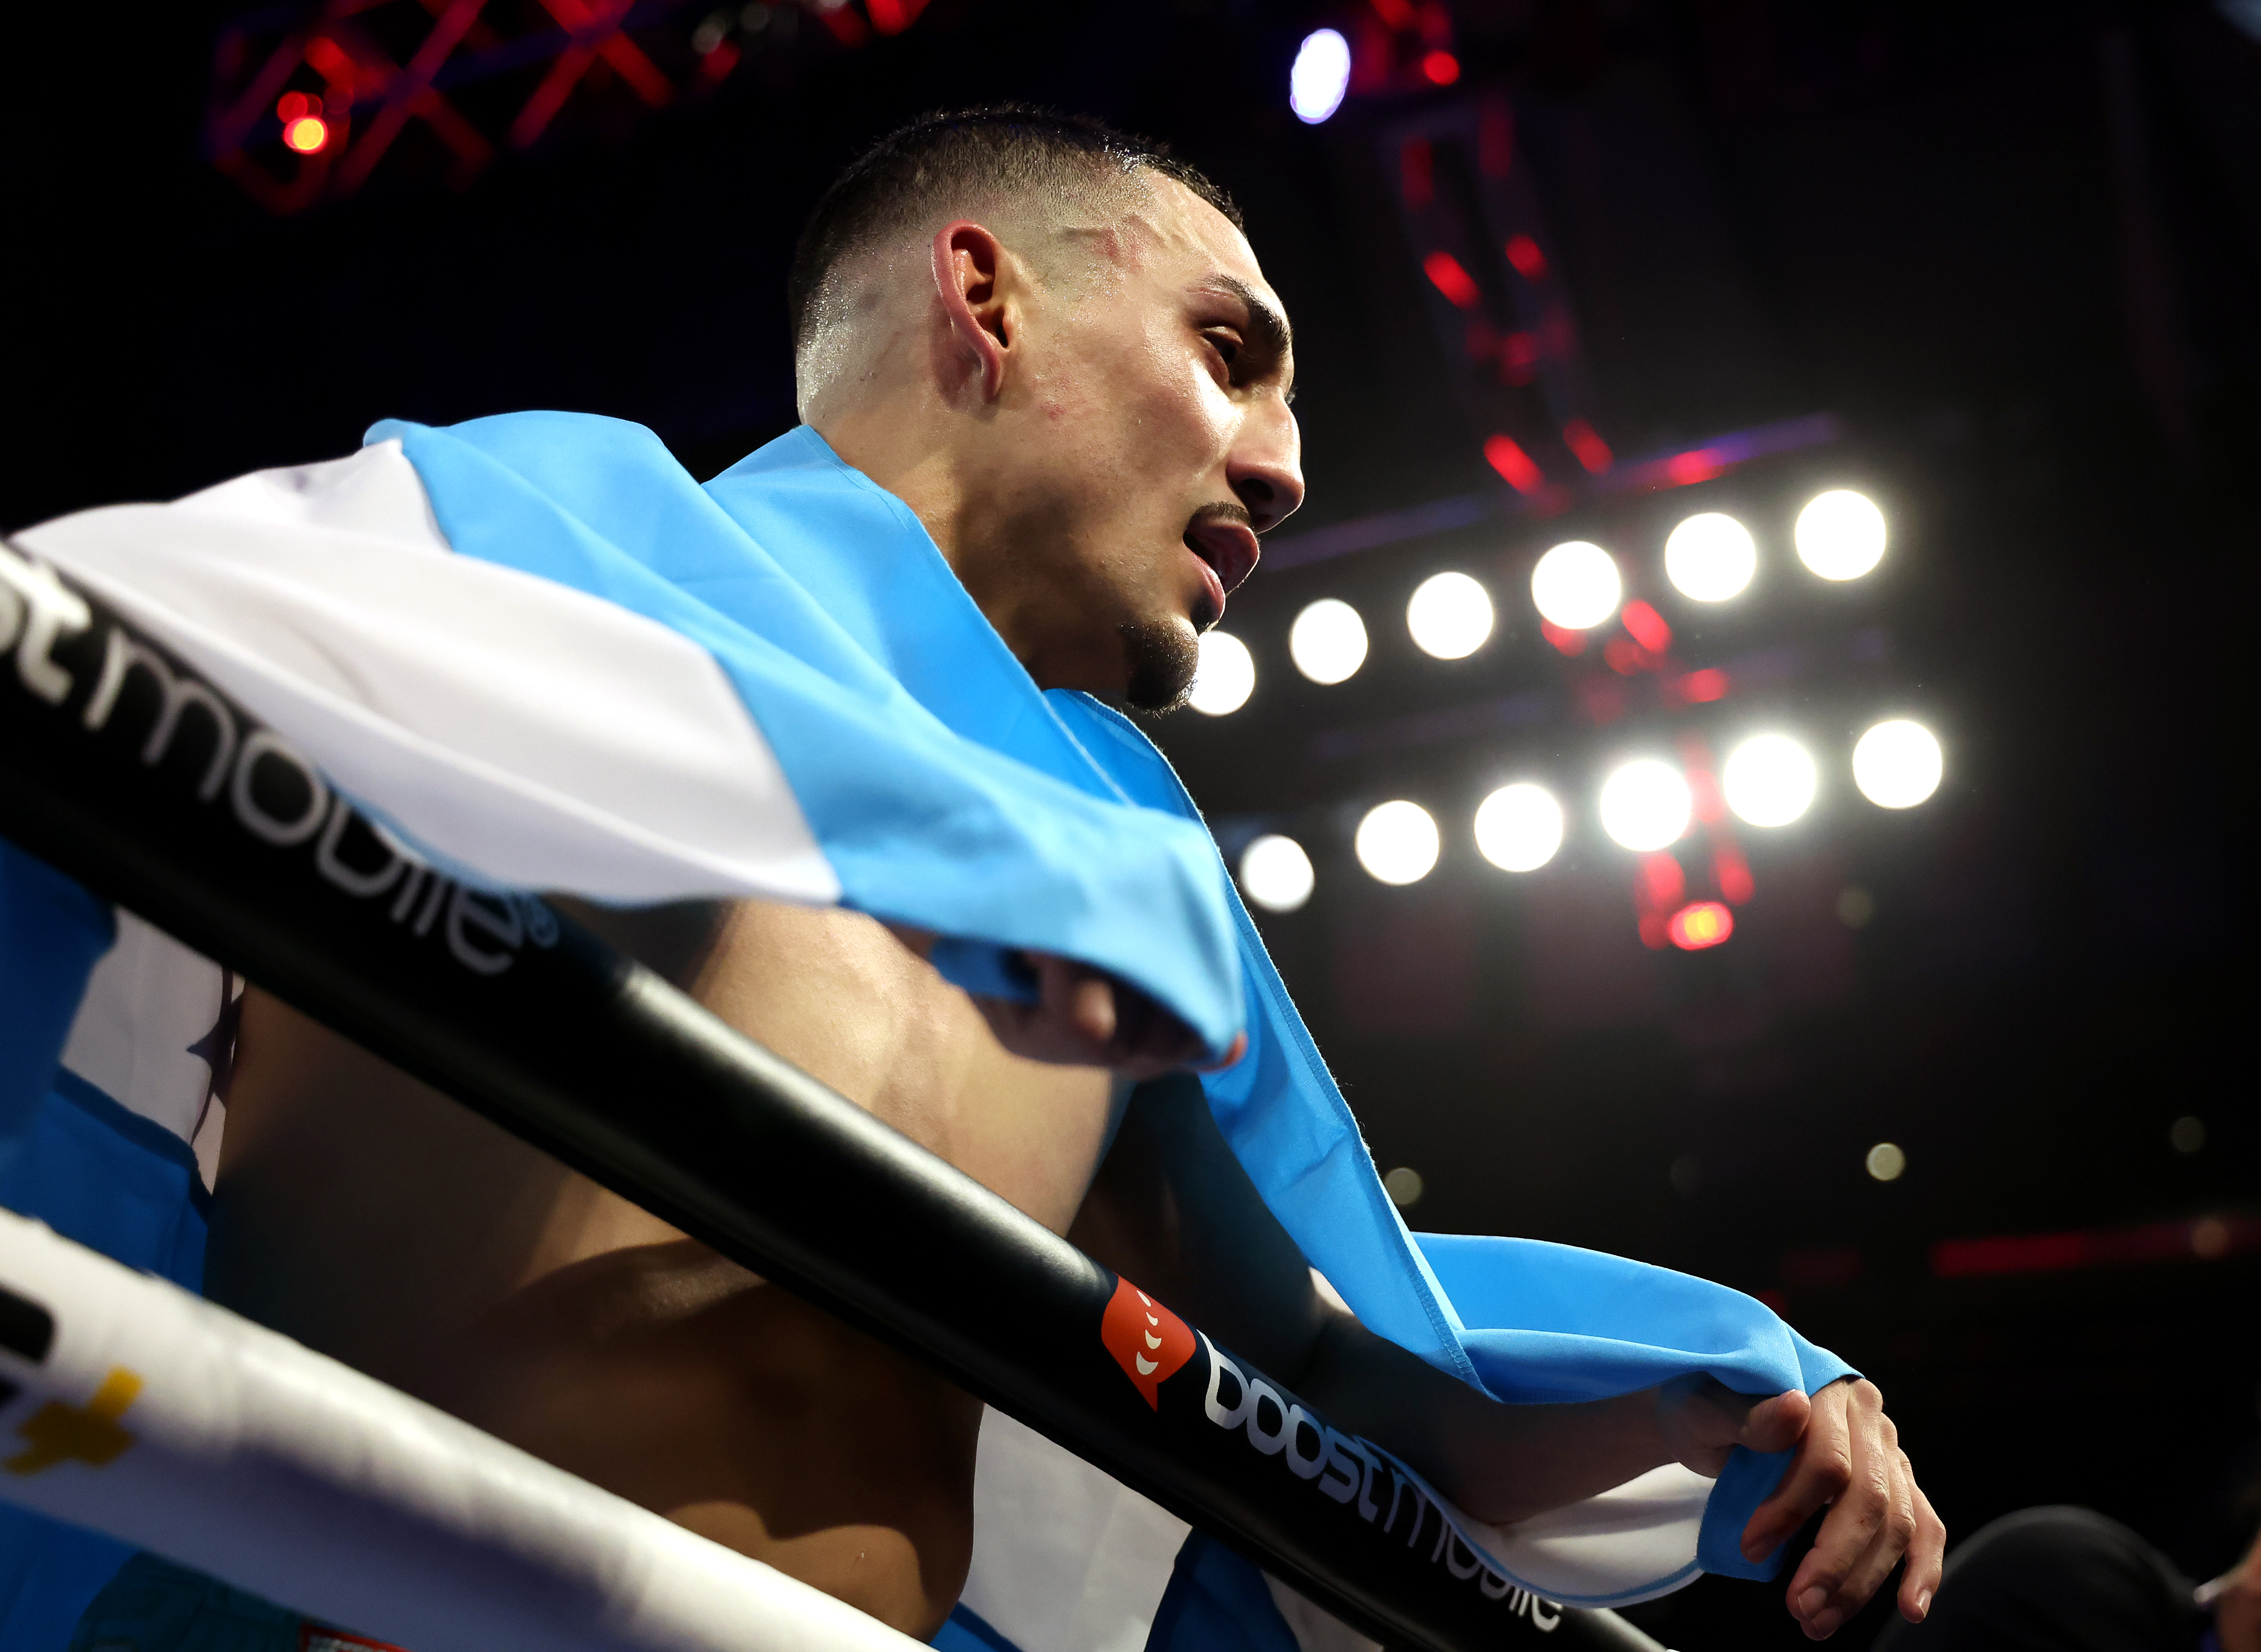 Is Teofimo Lopez still the same fighter he used to be?